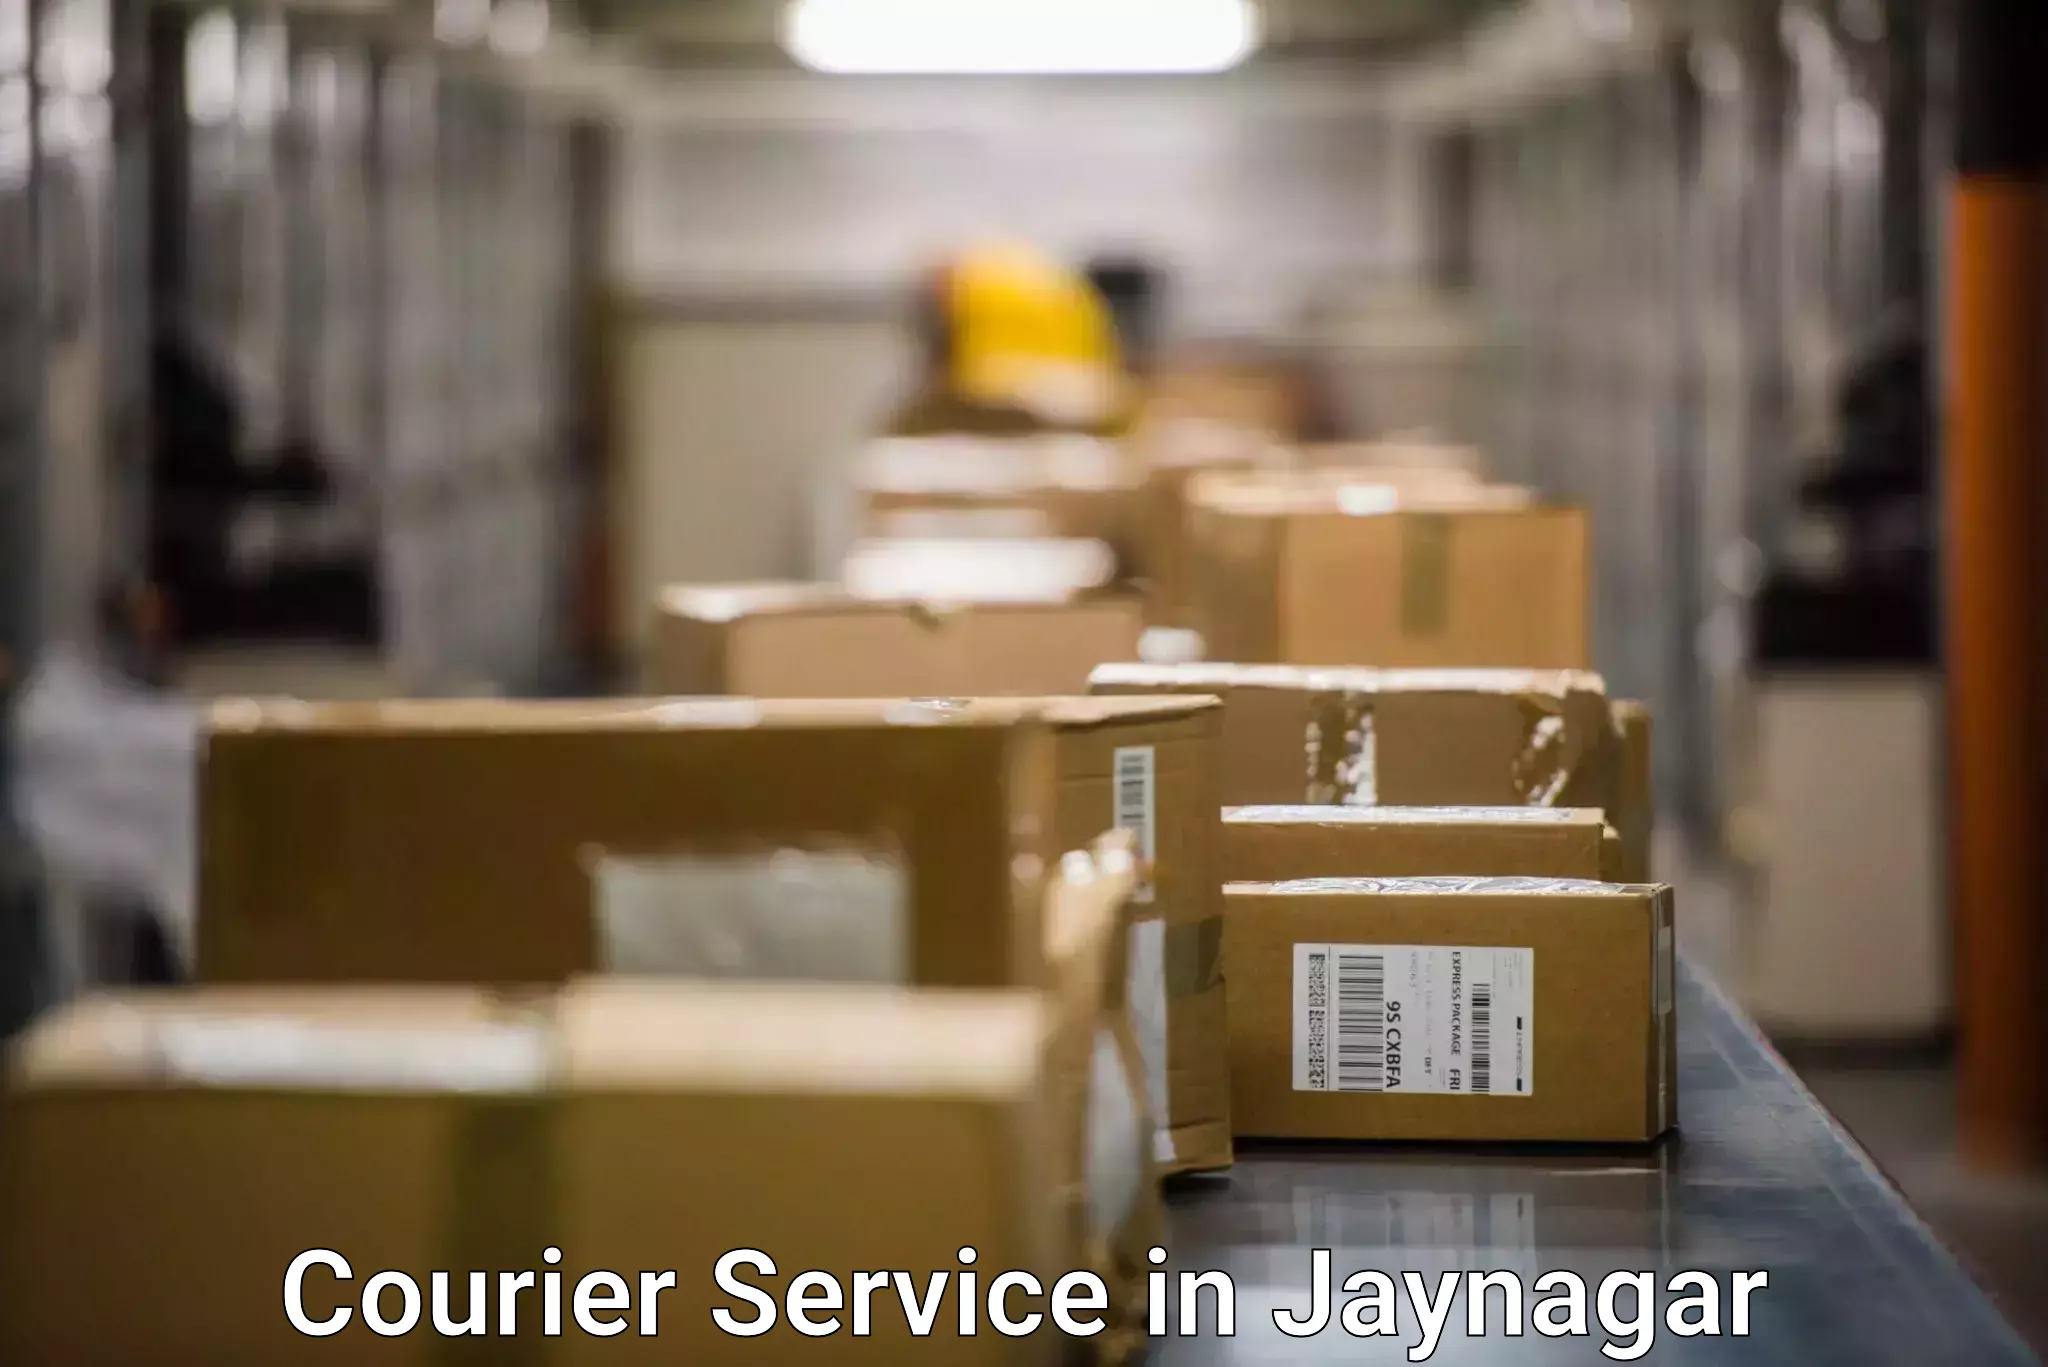 On-time delivery services in Jaynagar